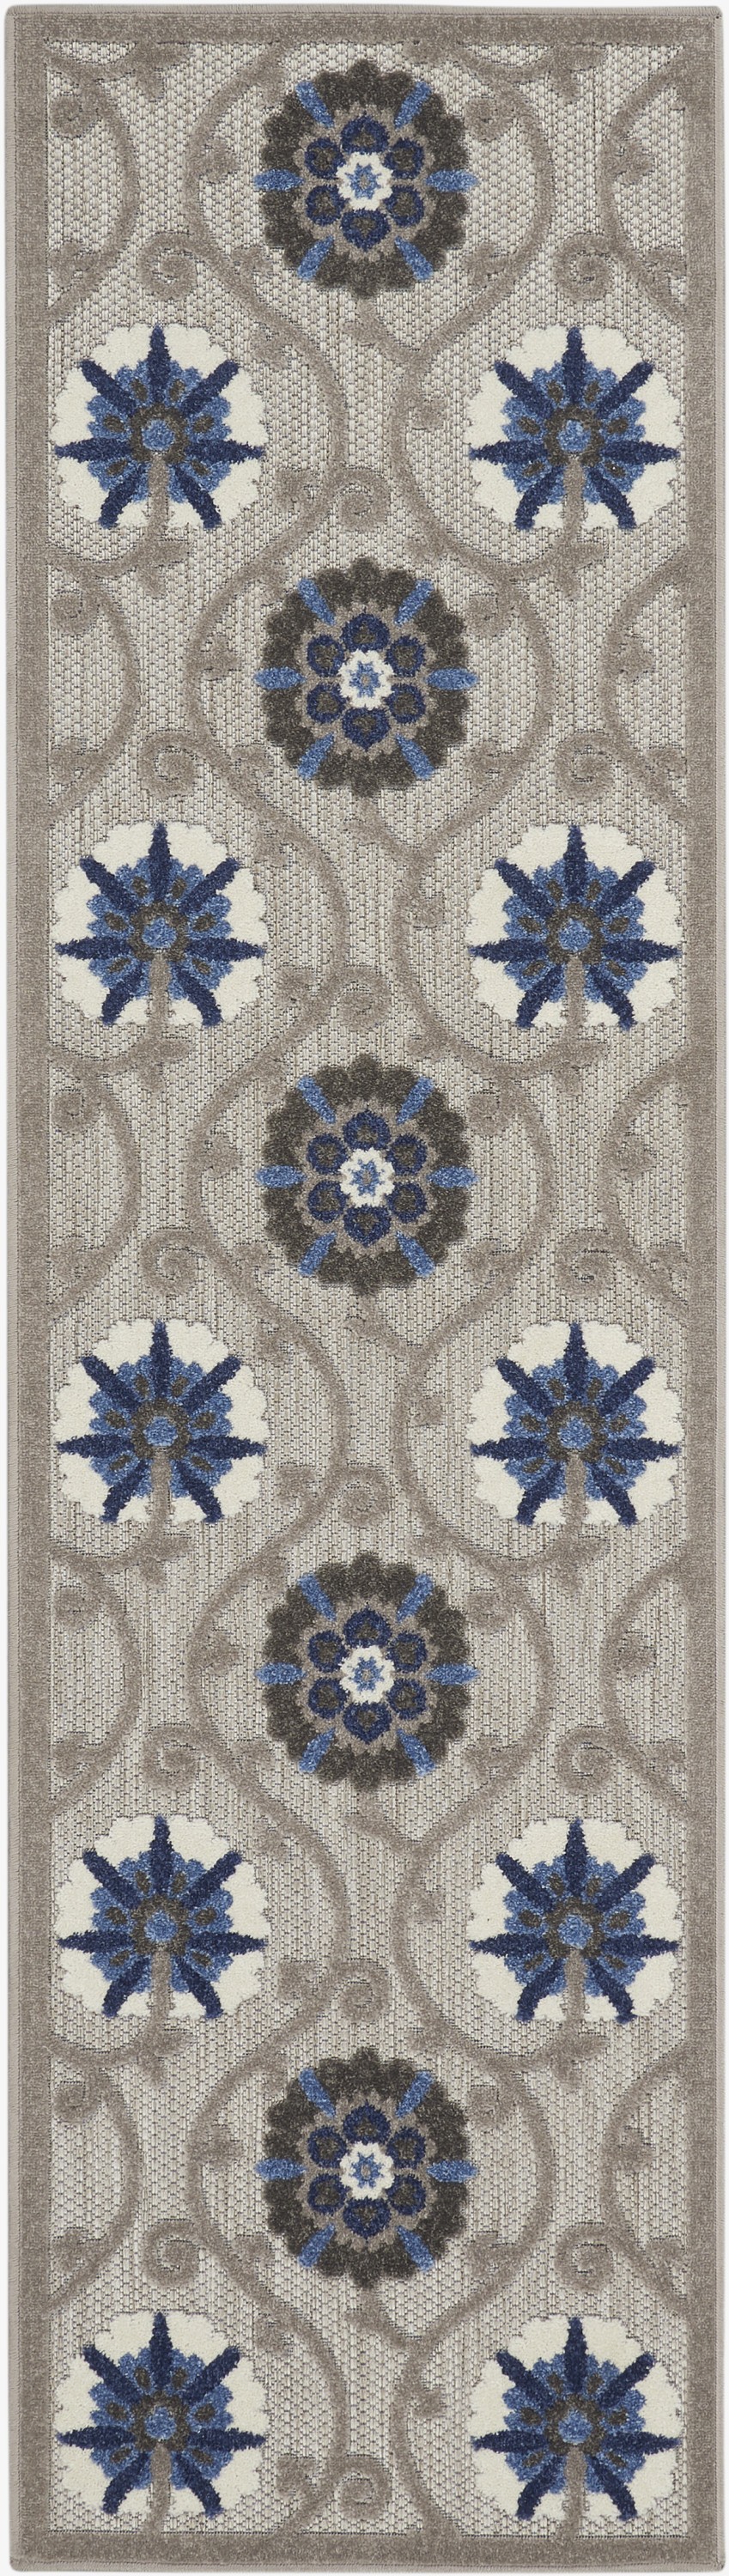 2' X 6' Blue And Gray Floral Indoor Outdoor Area Rug-384979-1